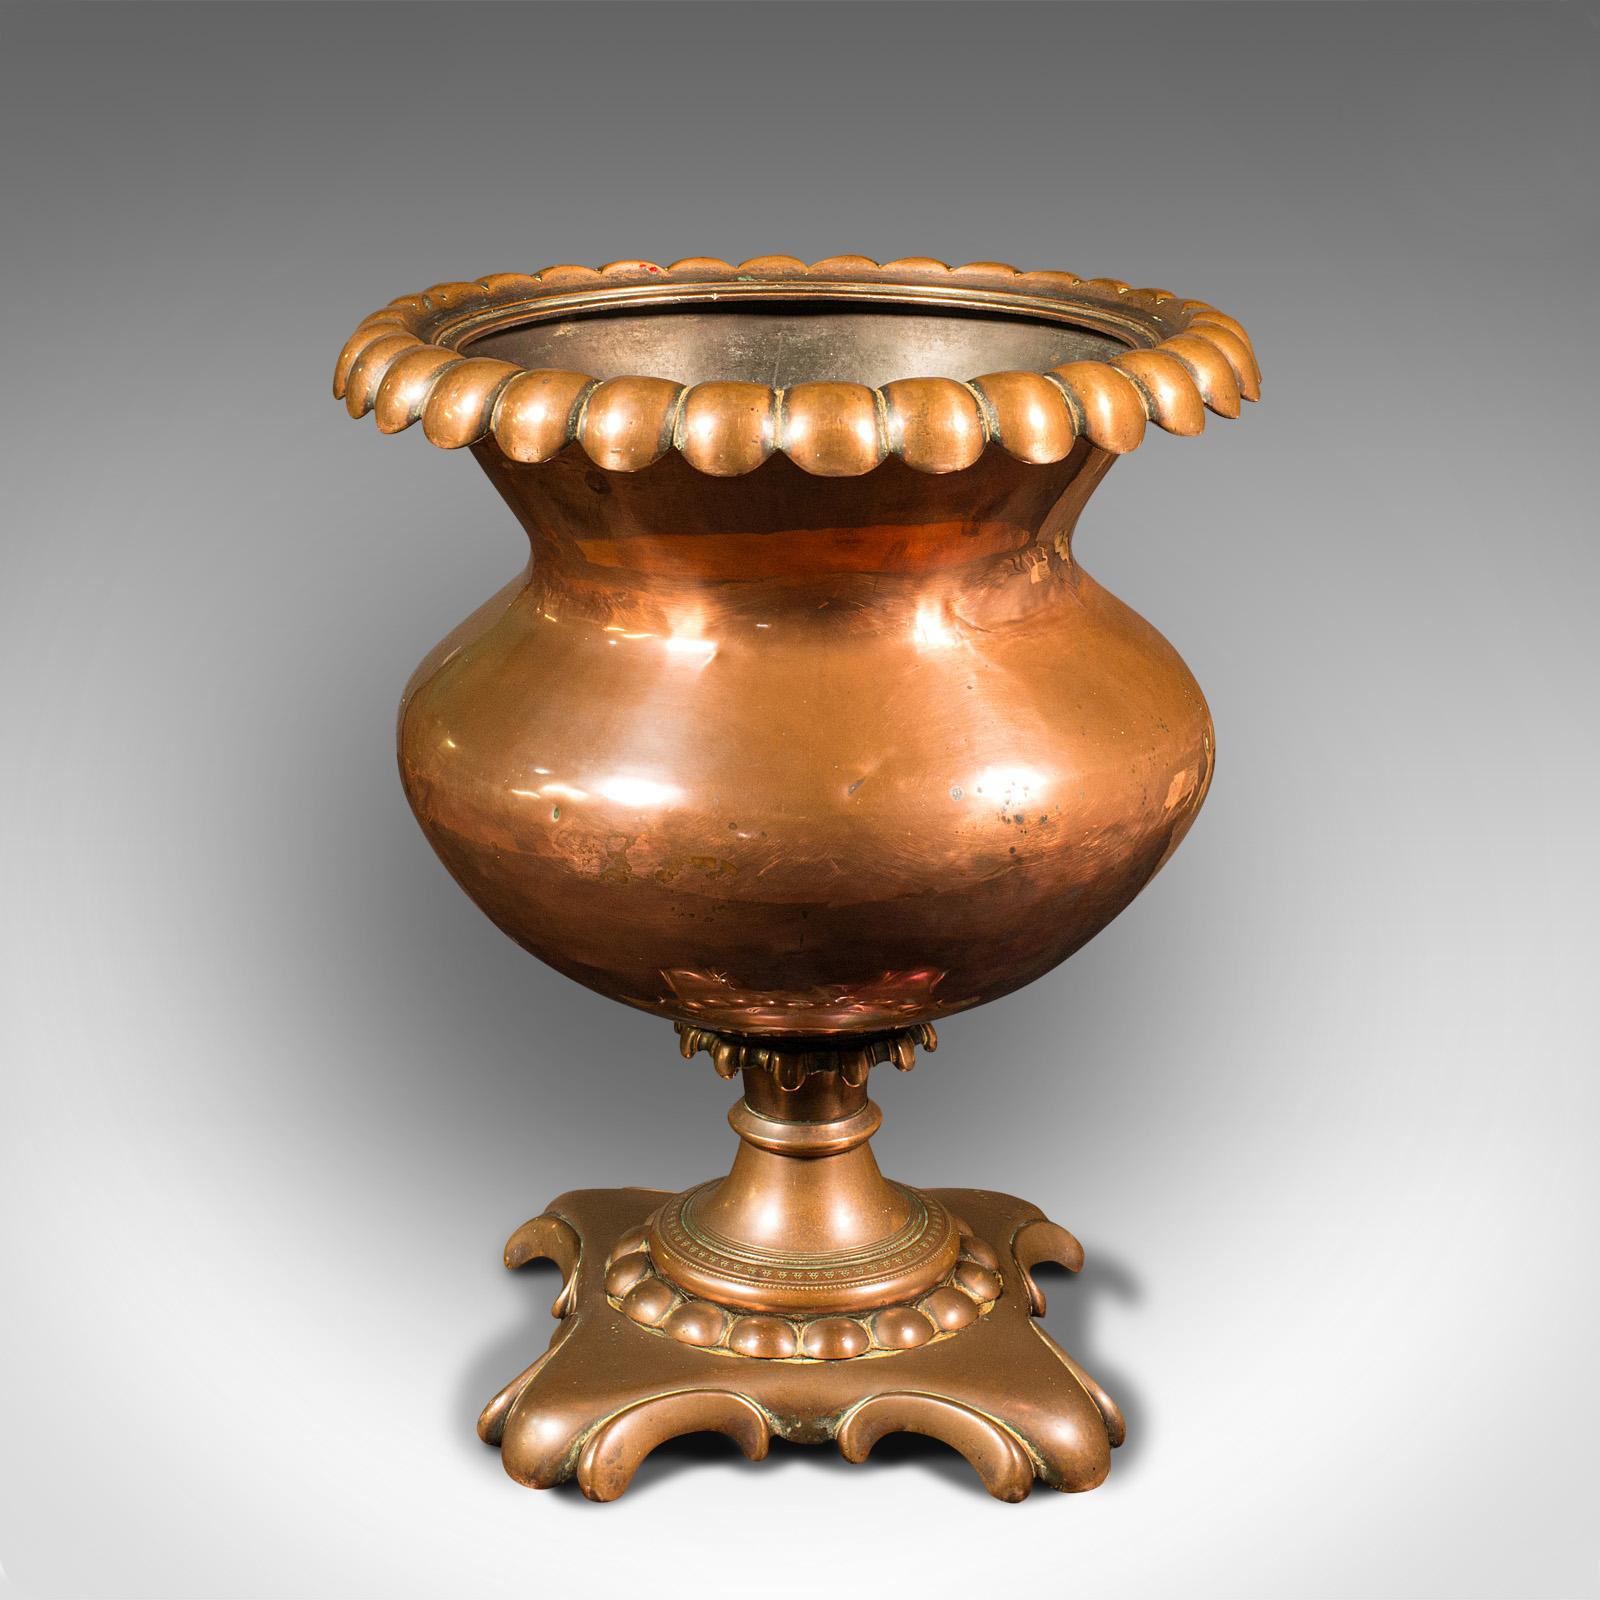 This is an antique decorative jardiniere. An English, copper planter urn with Art Nouveau taste, dating to the late Victorian period, circa 1900.

Flourishes of natural forms accentuate in the Art Nouveau manner
Displays a desirable aged patina